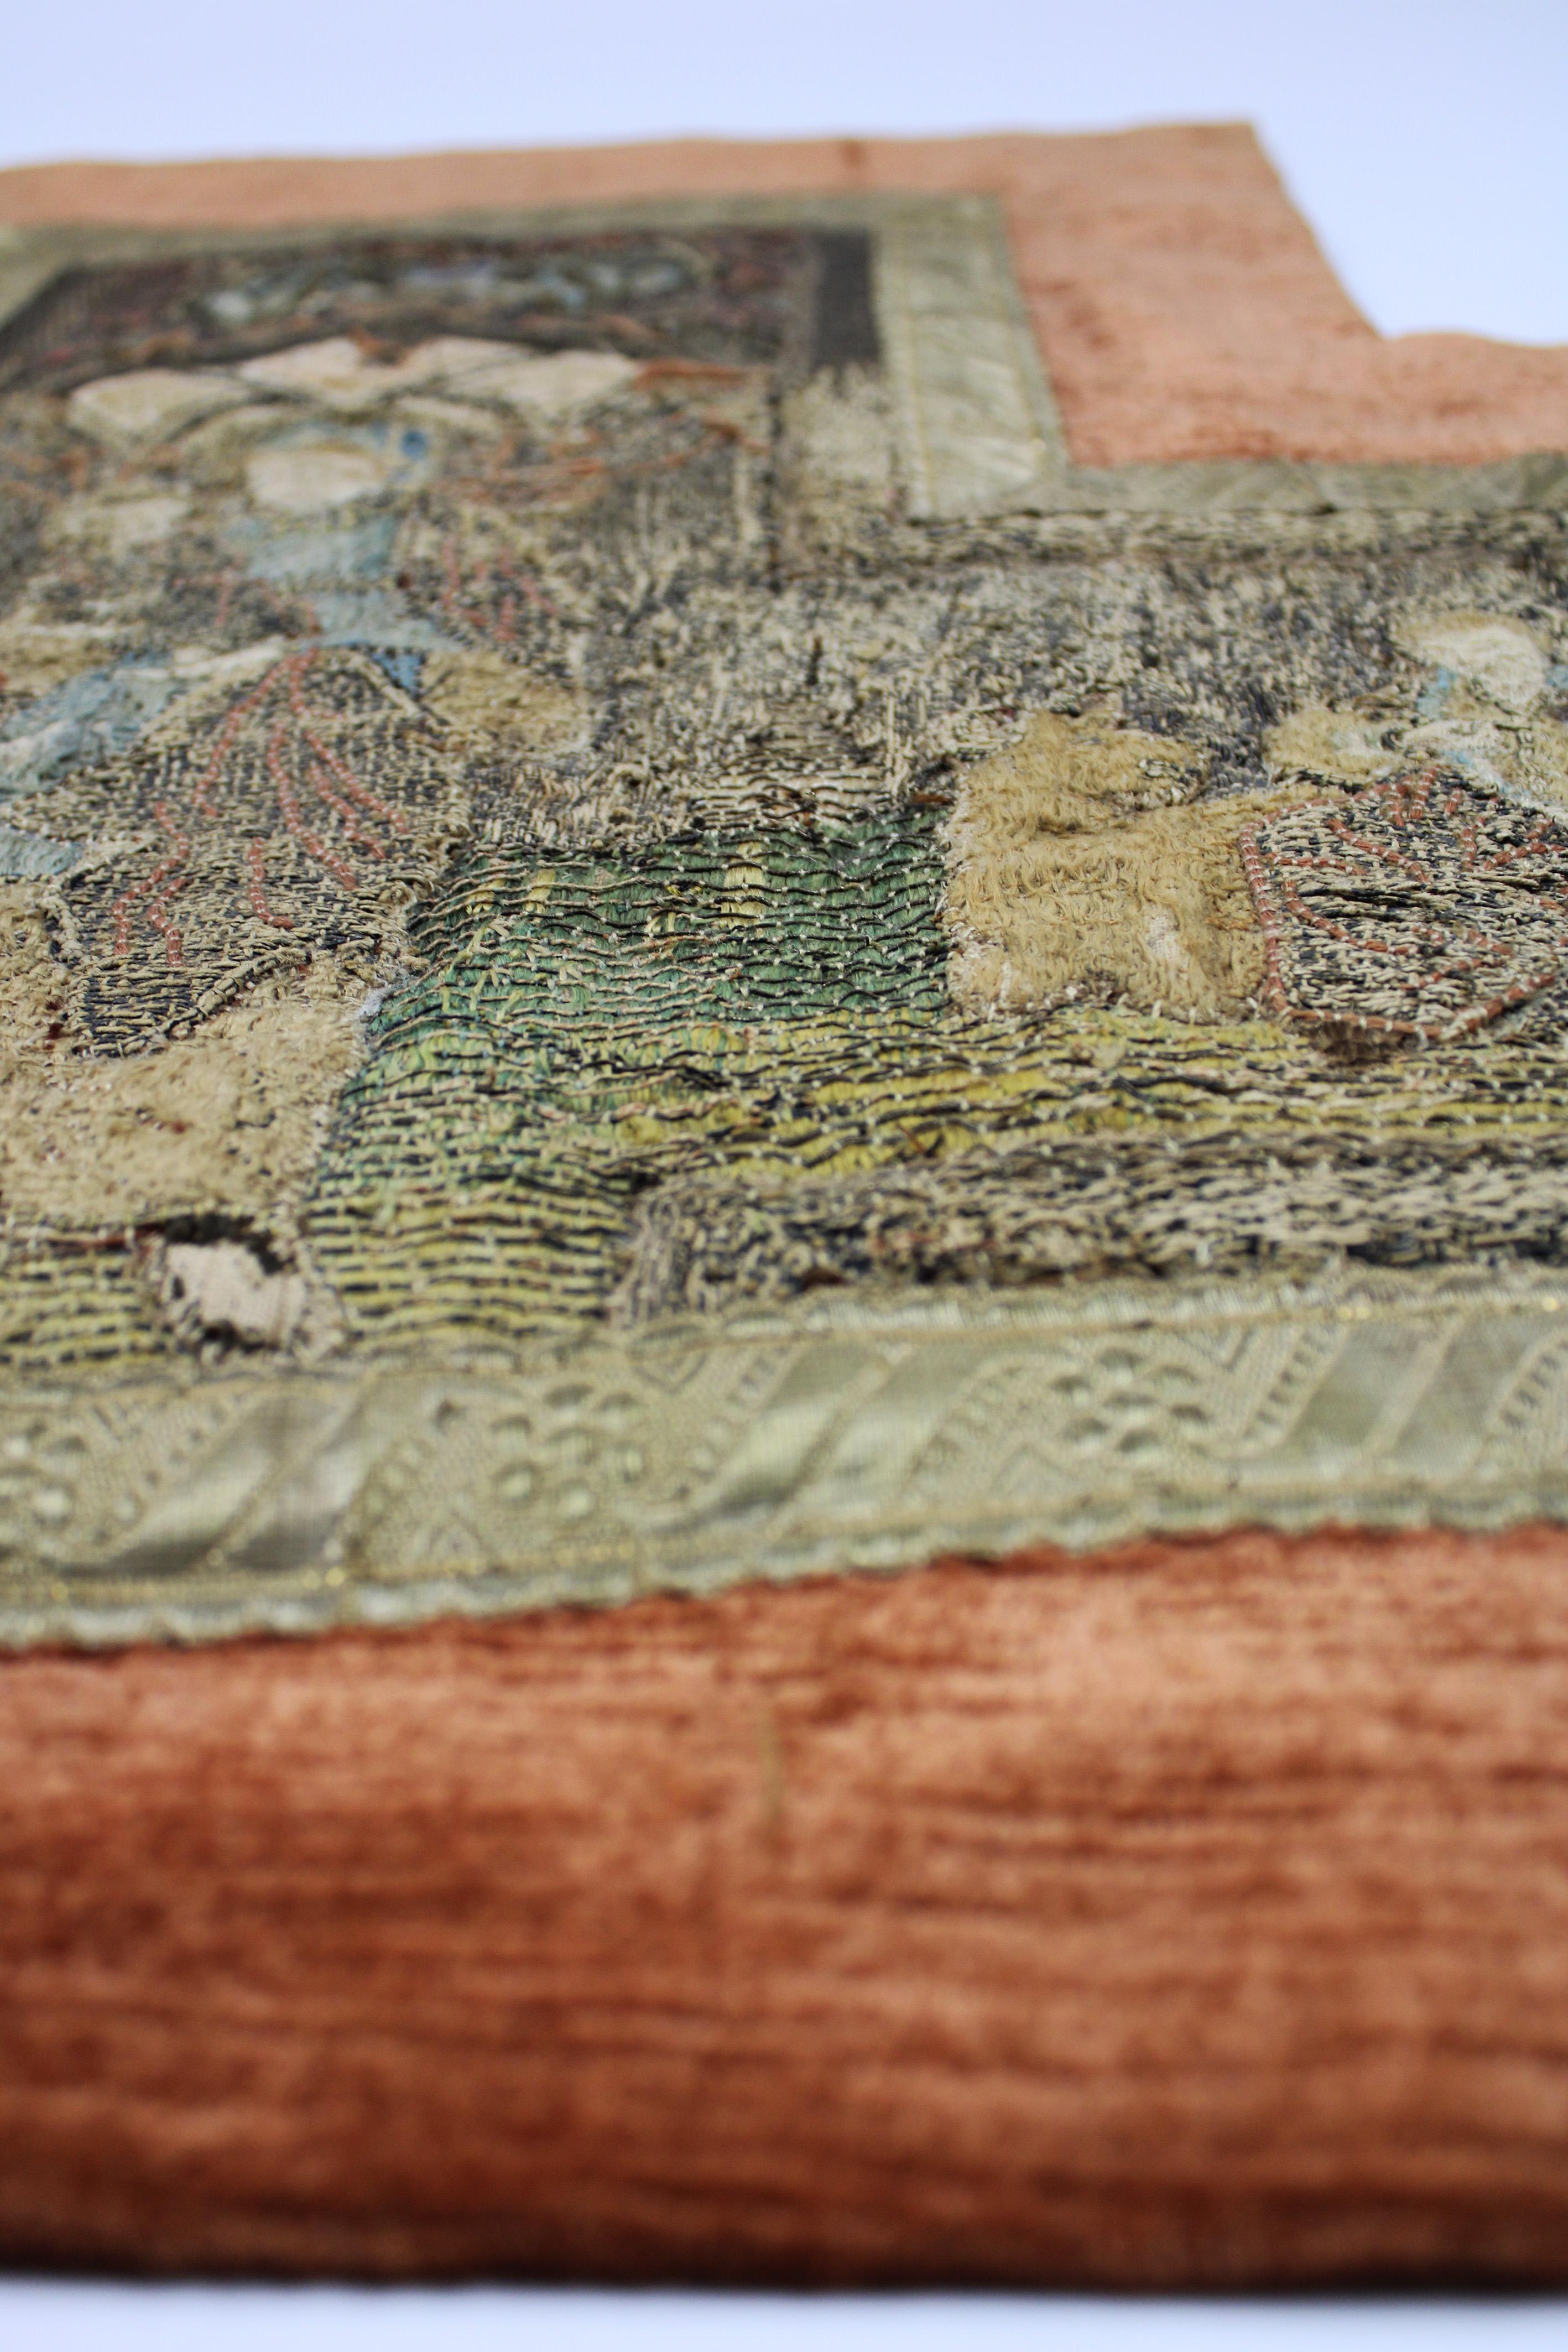 Flemish Hand Embroidery 15th & 16th Century Gothic Silk & Gold threat Liturgical For Sale 2